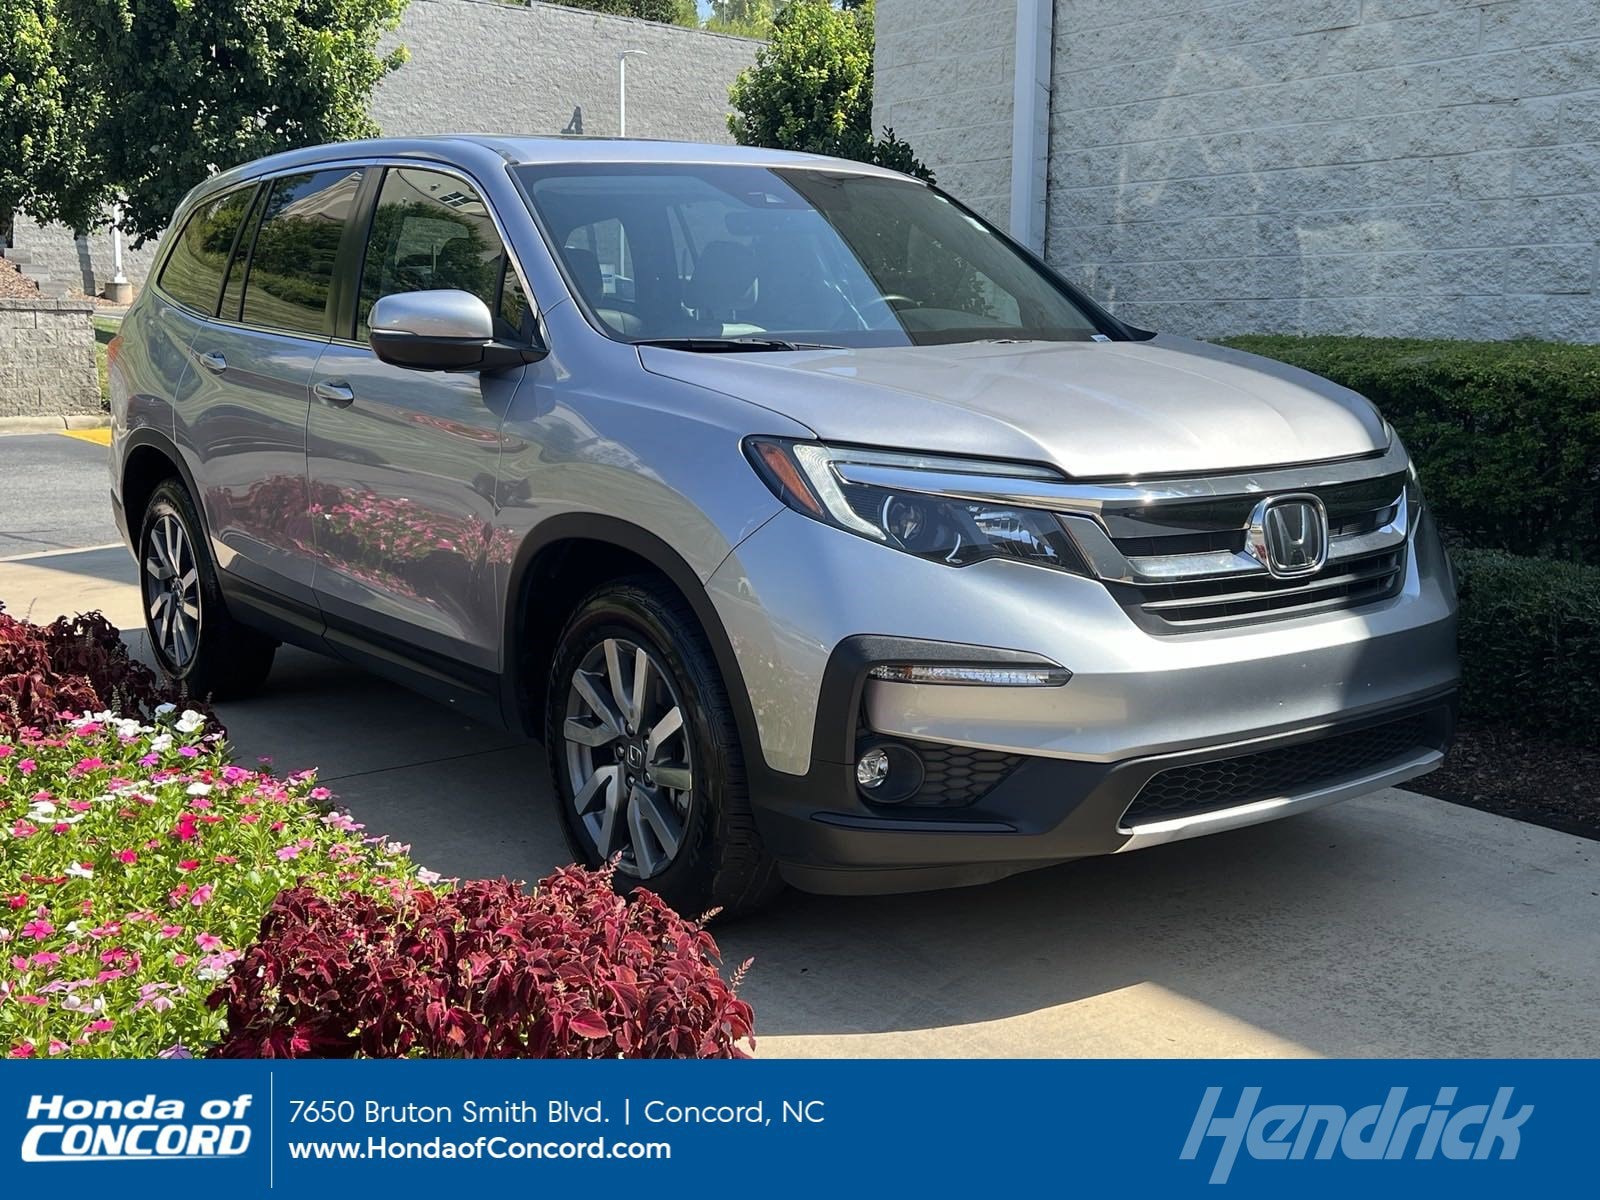 Used 2021 Honda Pilot For Sale in Concord VIN: 5FNYF5H50MB008959